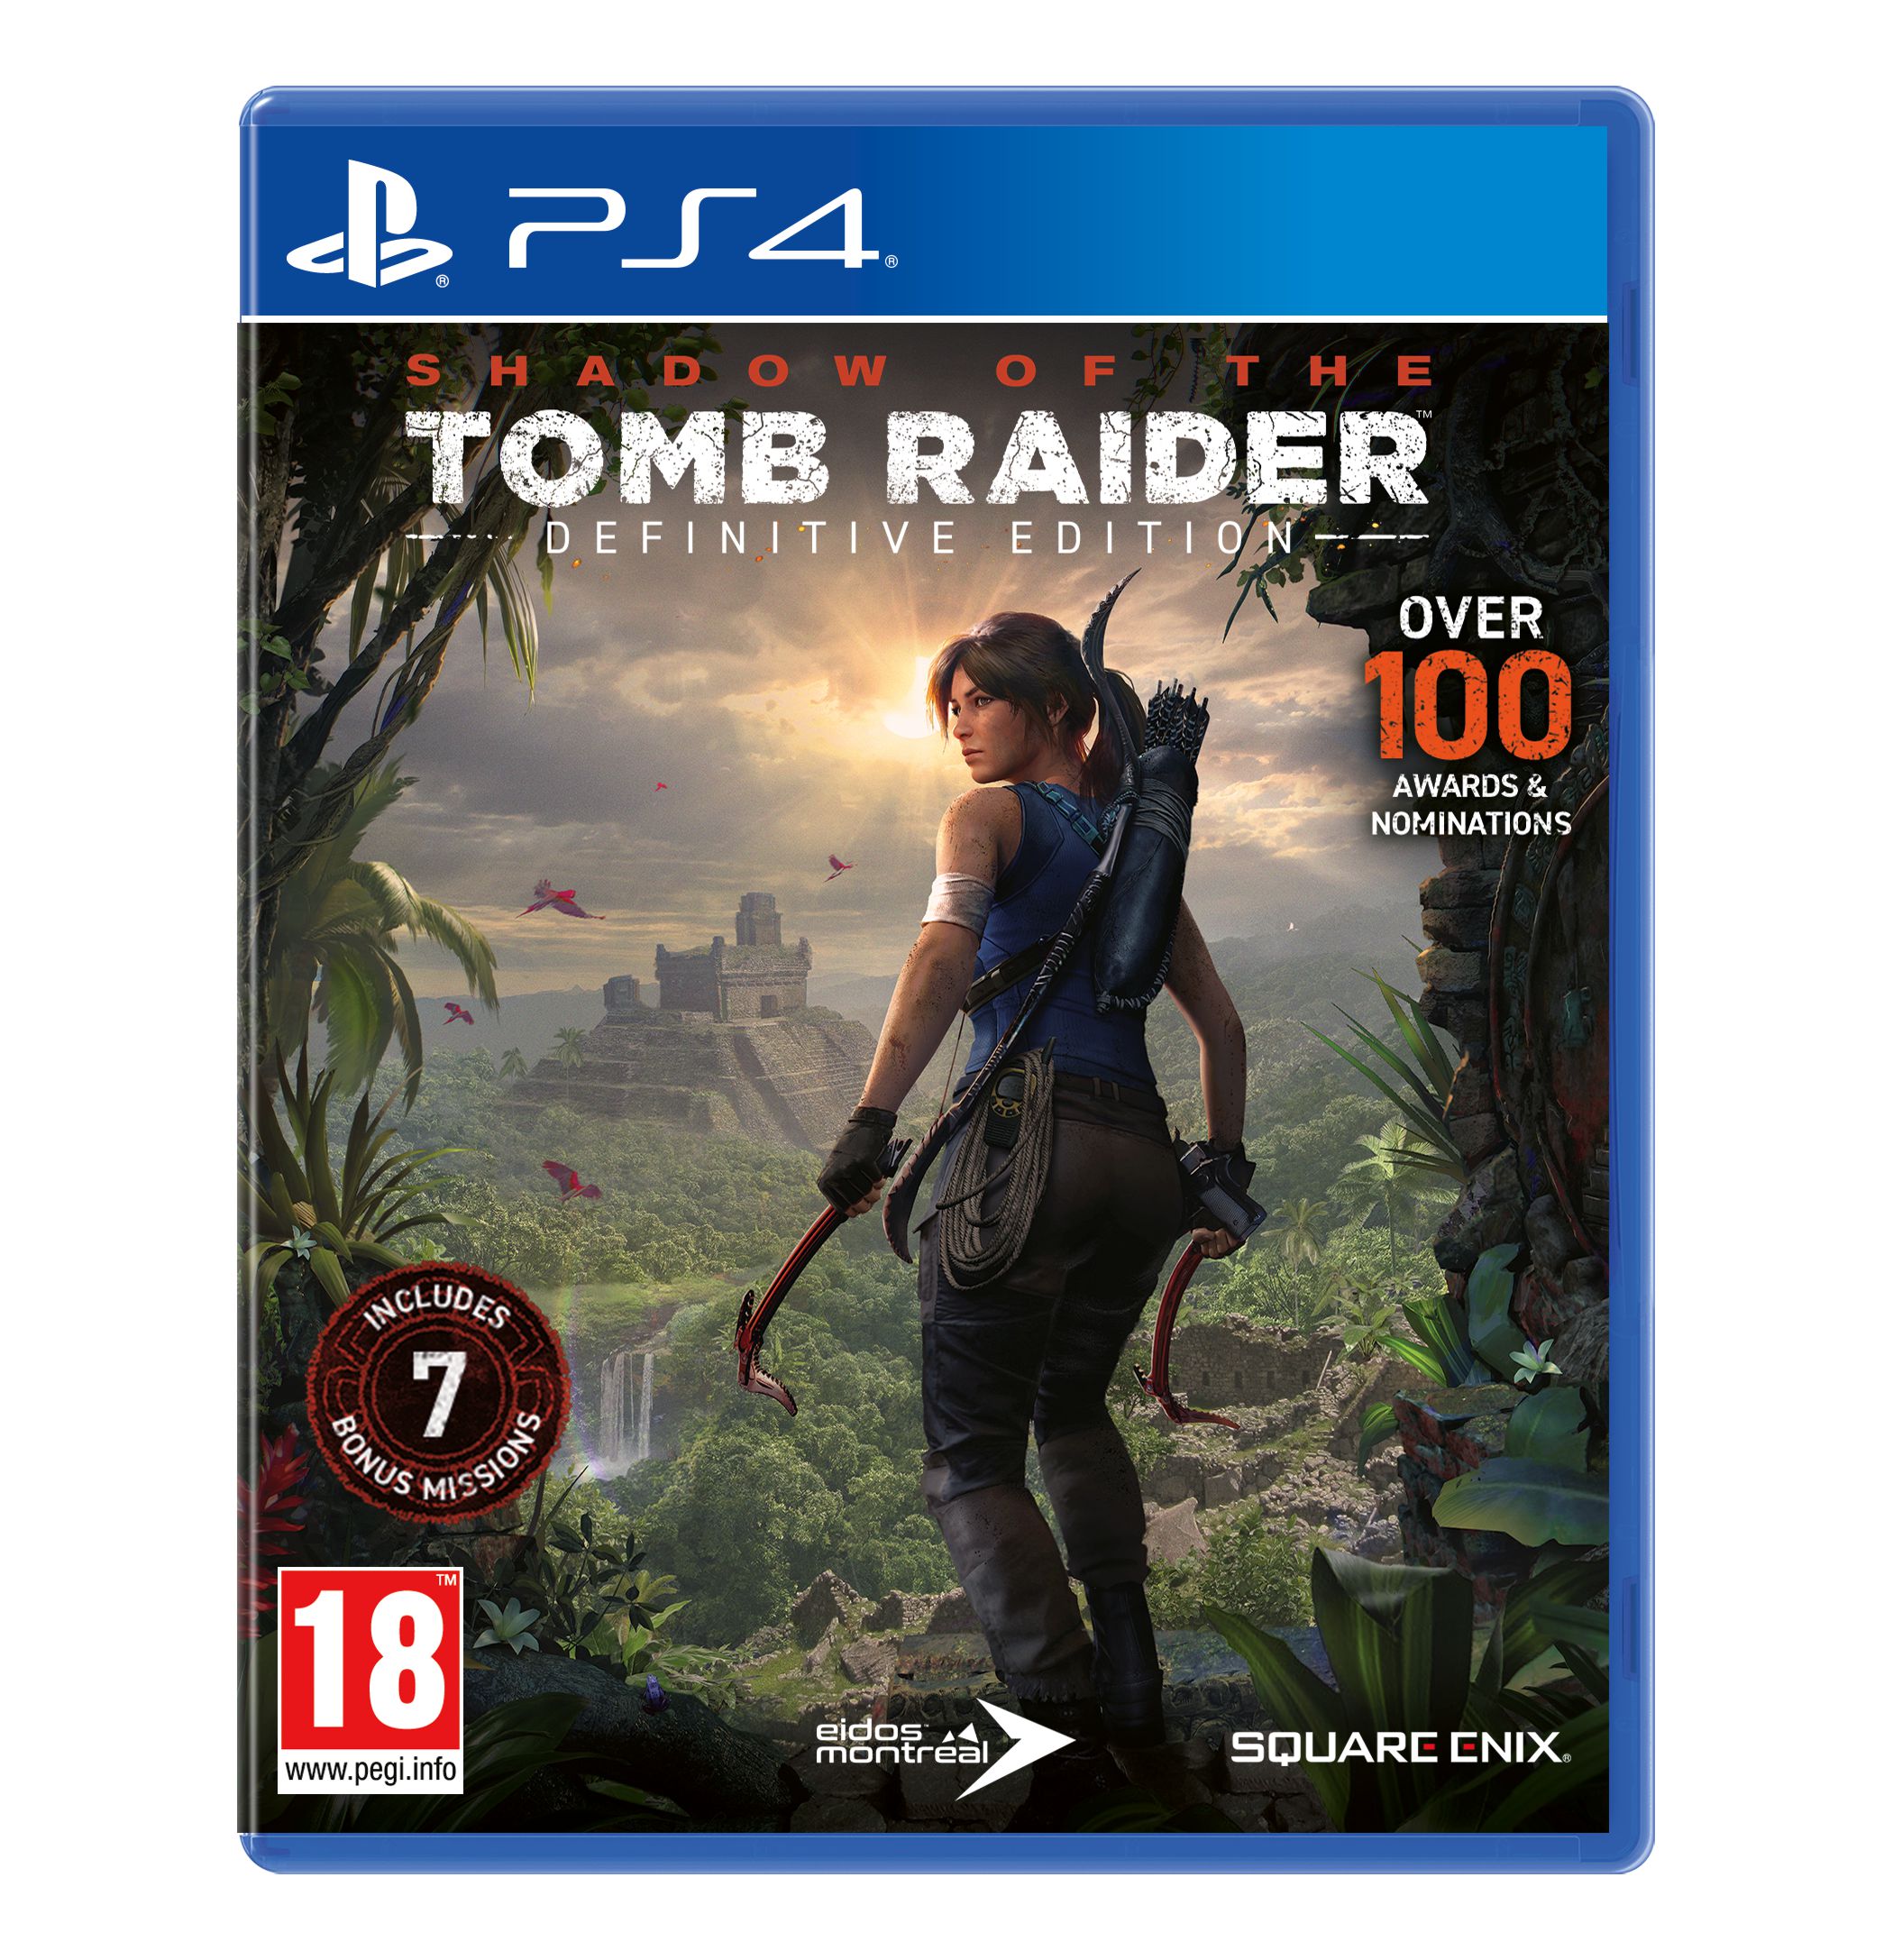 Shadow of the Tomb Raider - Definitive Edition, Square Enix